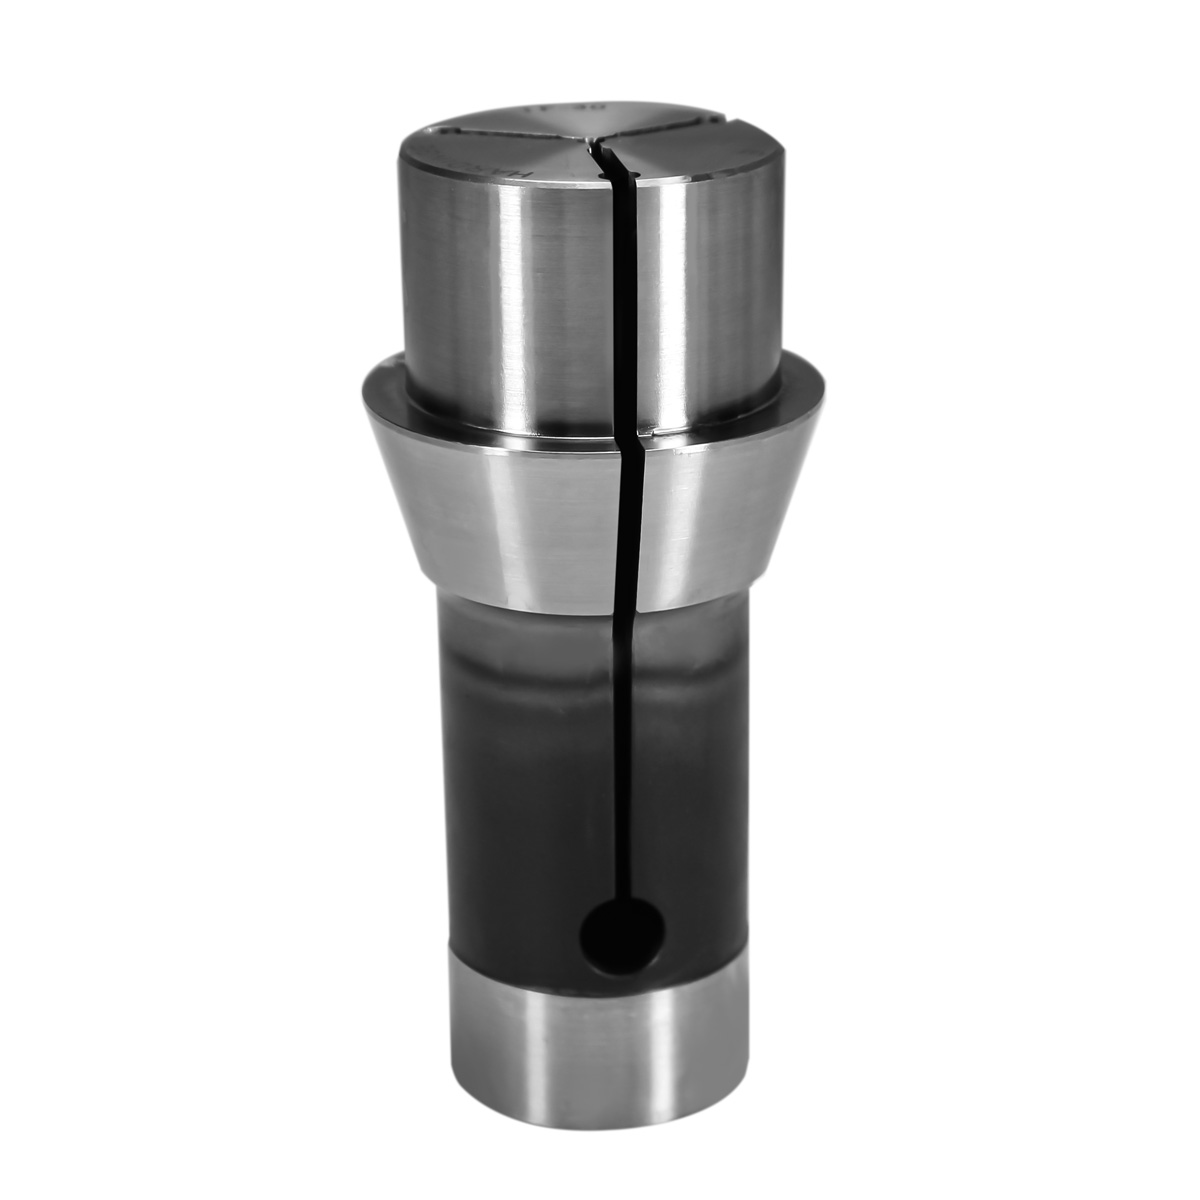 TF30 1/2" Extended Nose Emergency Swiss Collet with 1/16" Pilot Hole